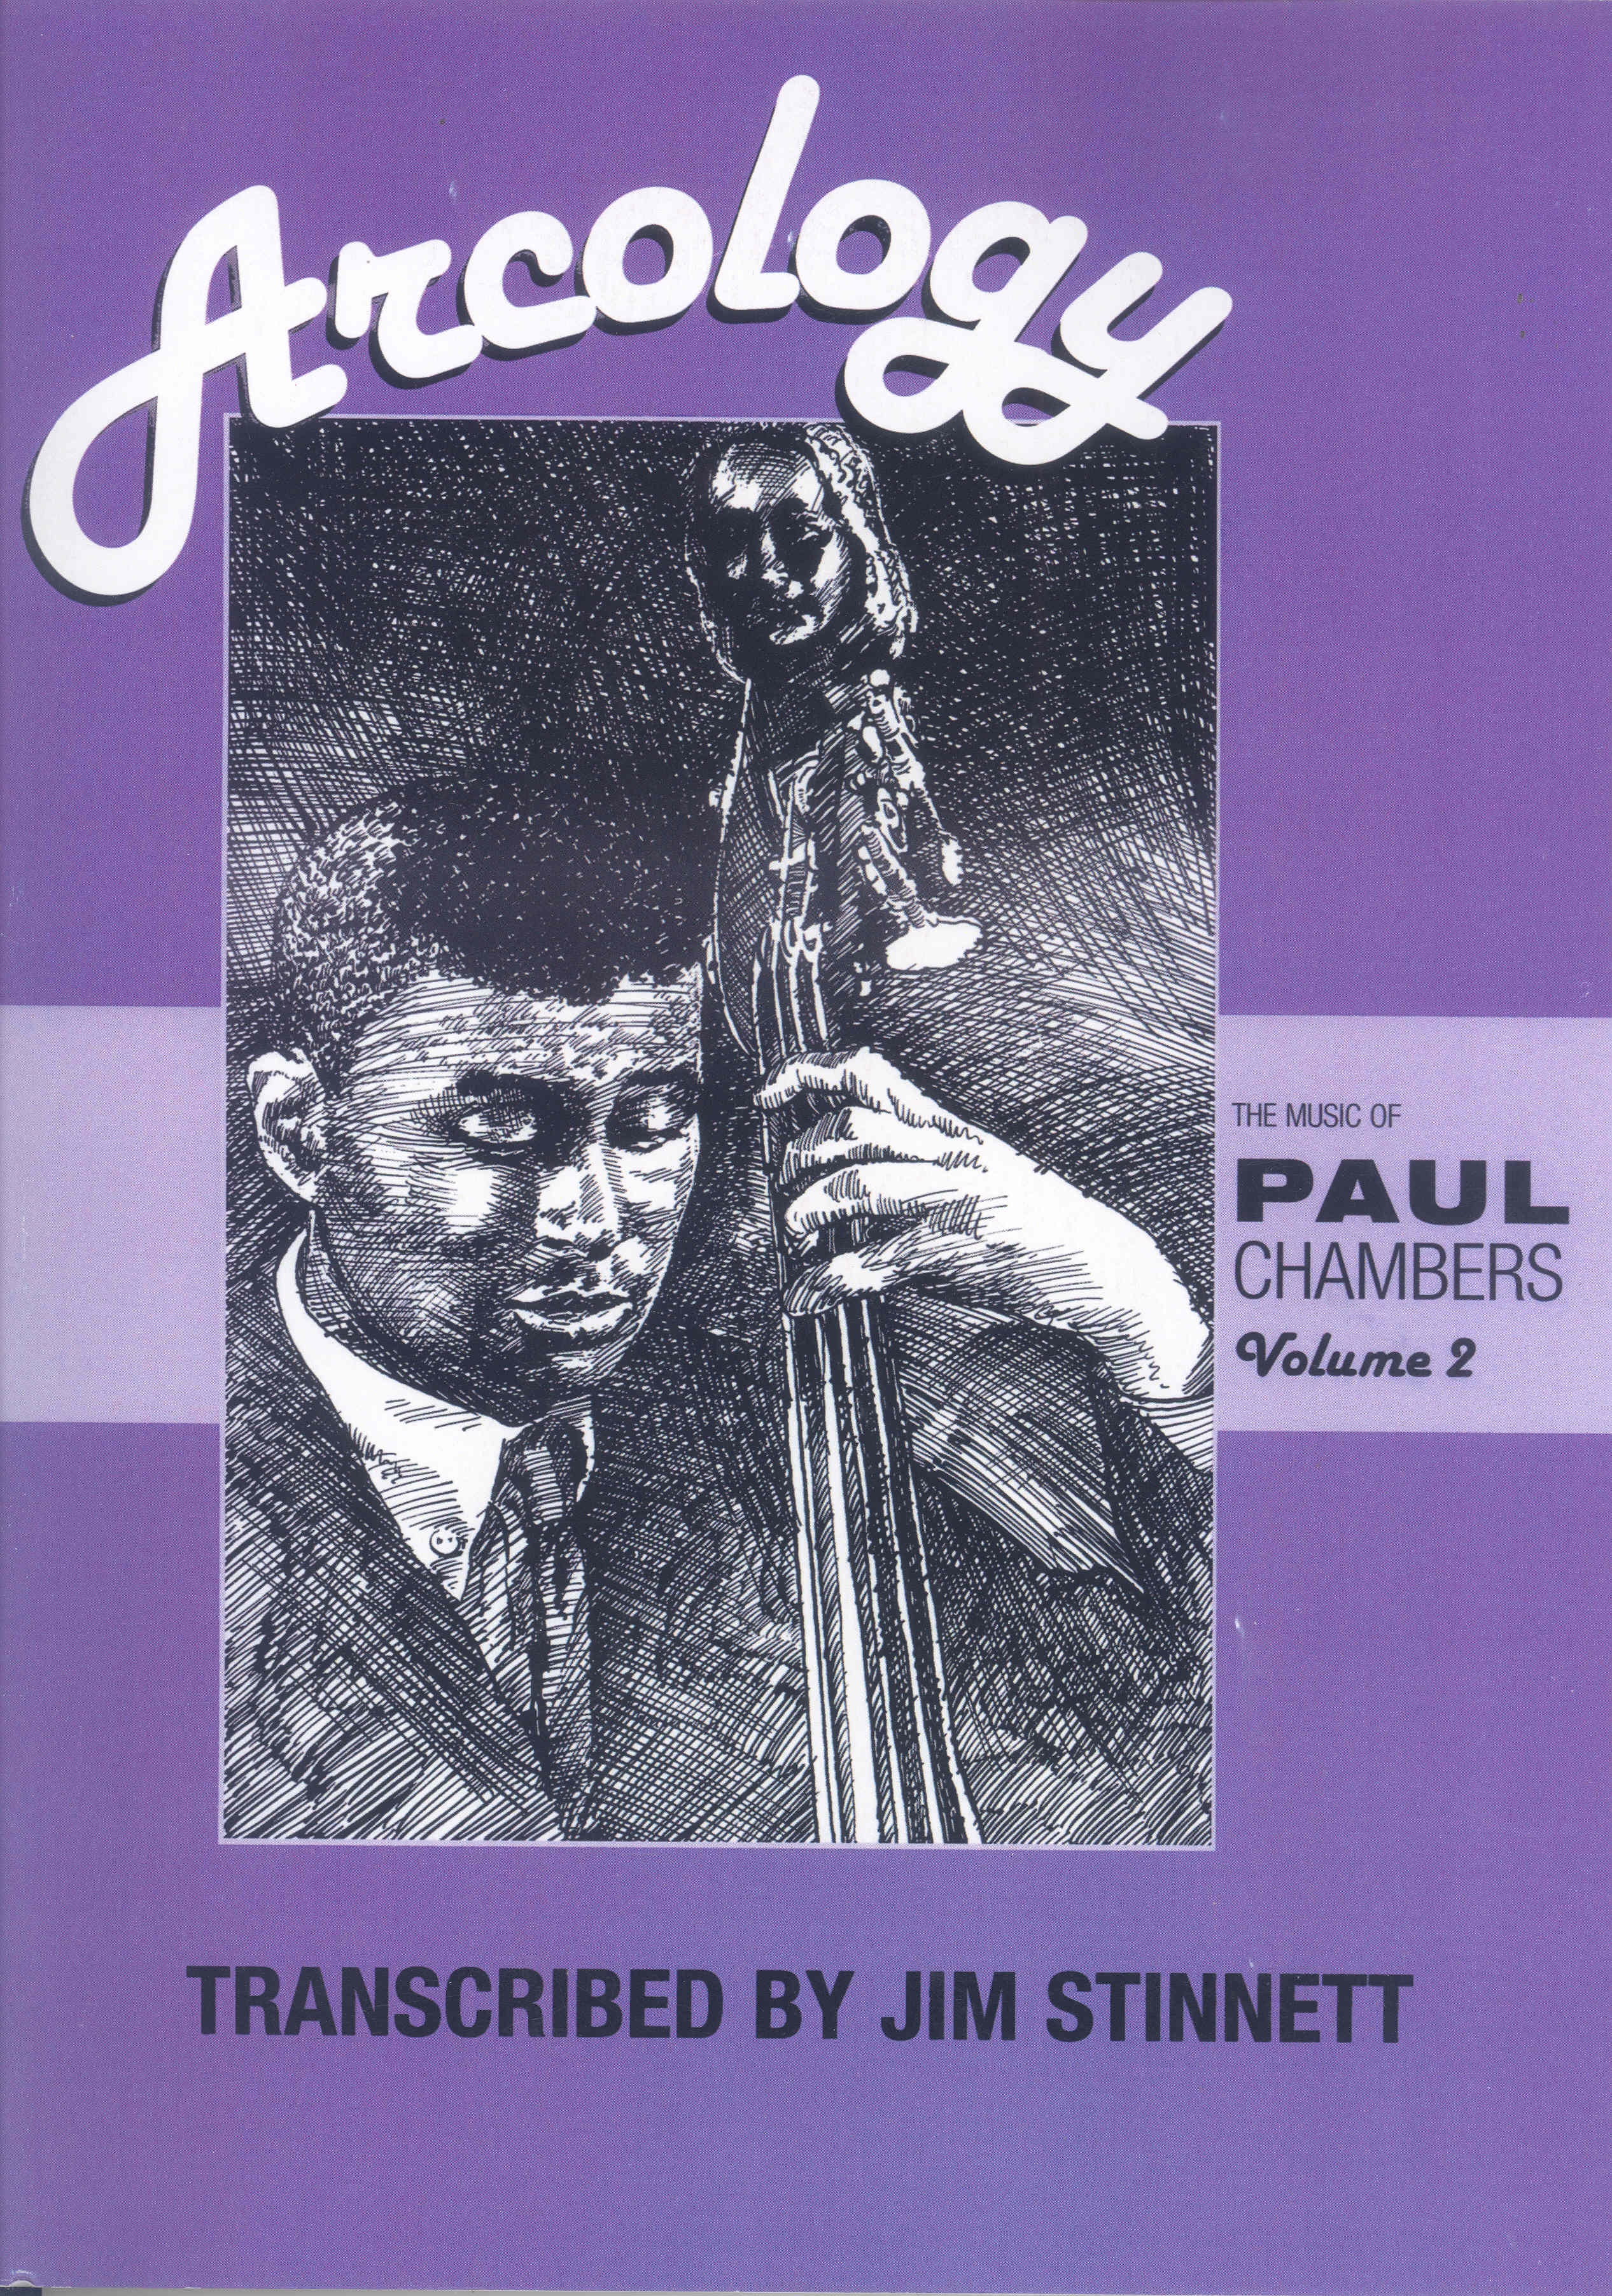 Paul Chambers Solos Vol 2 Arcology Double Bass Sheet Music Songbook